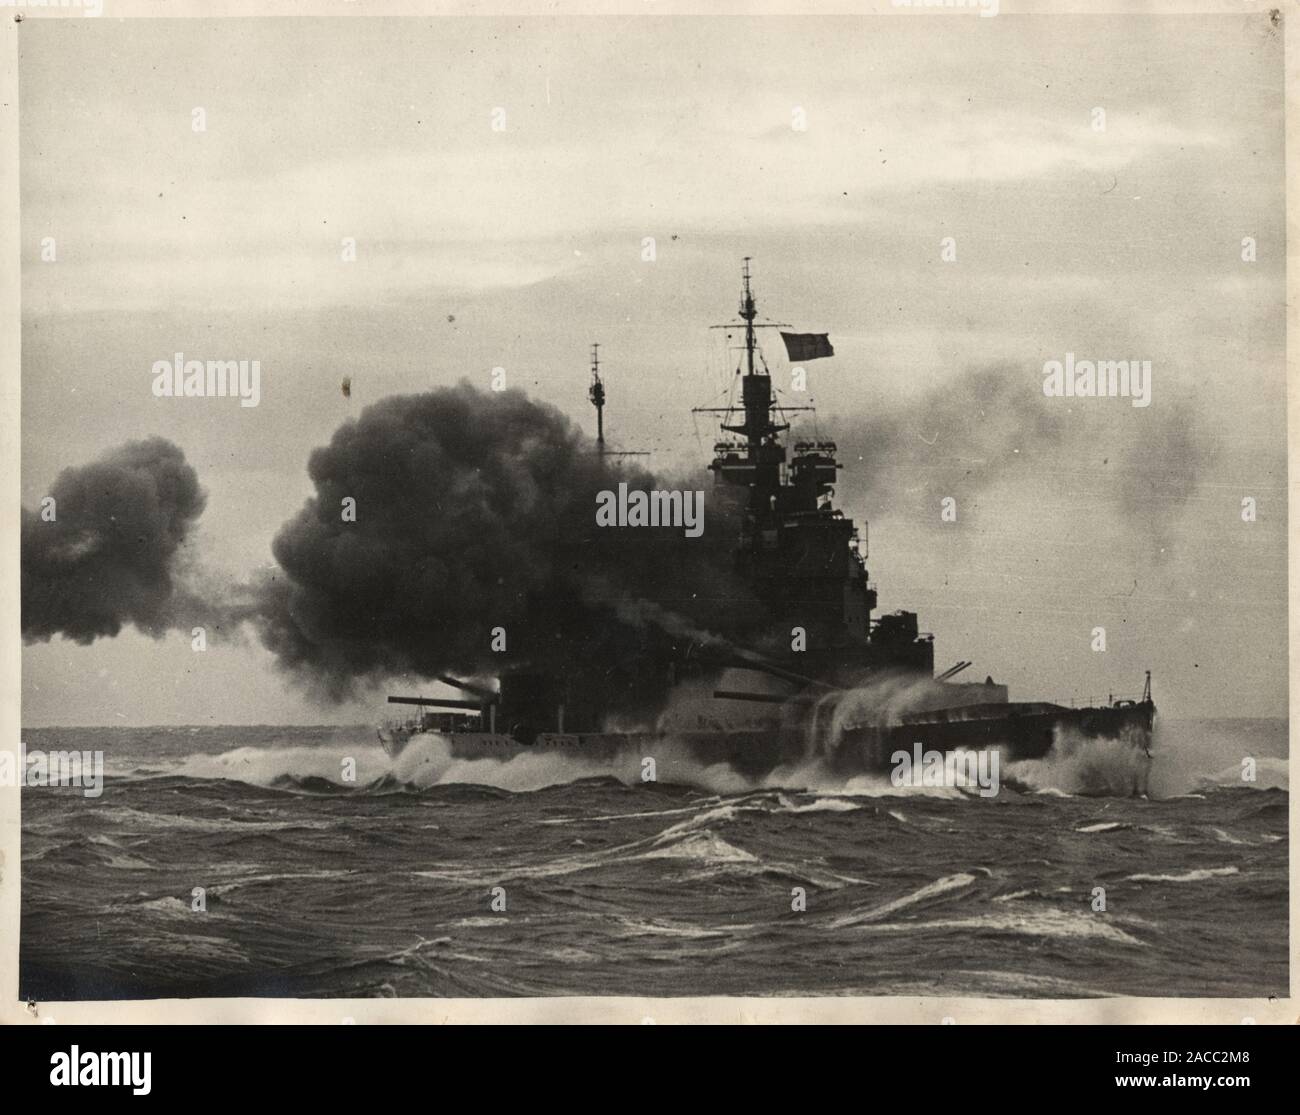 Vintage photograph of a Broadside firing by HMS Duke of York Royal Navy Battleship. HMS Duke of York was a King George V class battleship of the Royal Navy. Commissioned into the Royal Navy on 4 November 1941, subsequently seeing combat service during the Second World War. Stock Photo